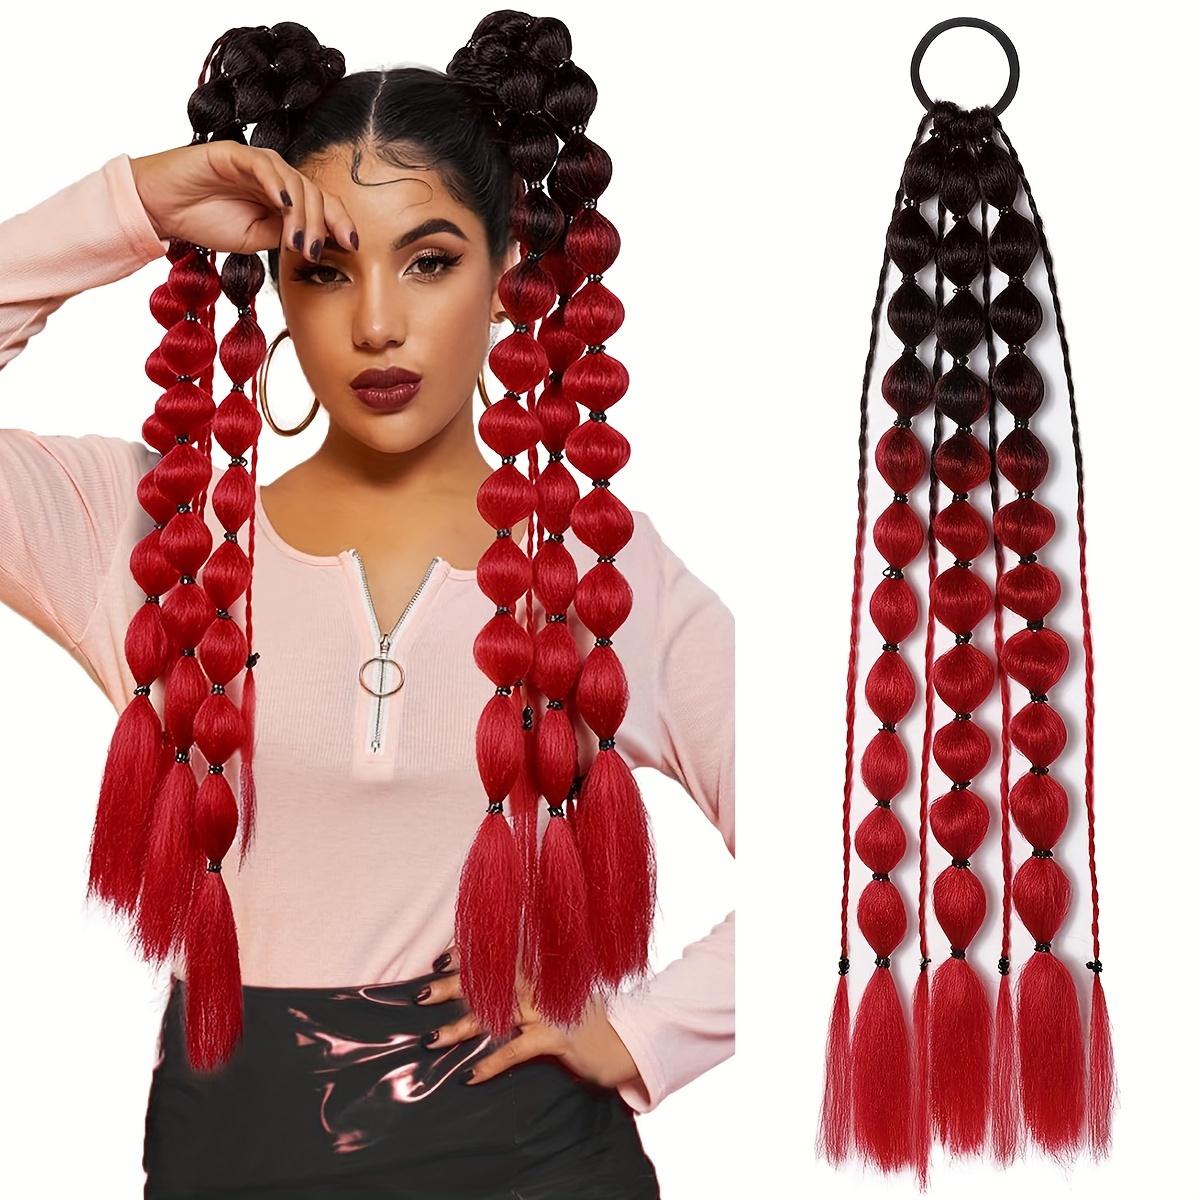 

24\" Lightweight Colored Hair Extensions For Bubble Ponytail Extension With Hair Tie - Ombre Crazy Hair Day Accessories For Girls - Suitable For Edc Festival Rave